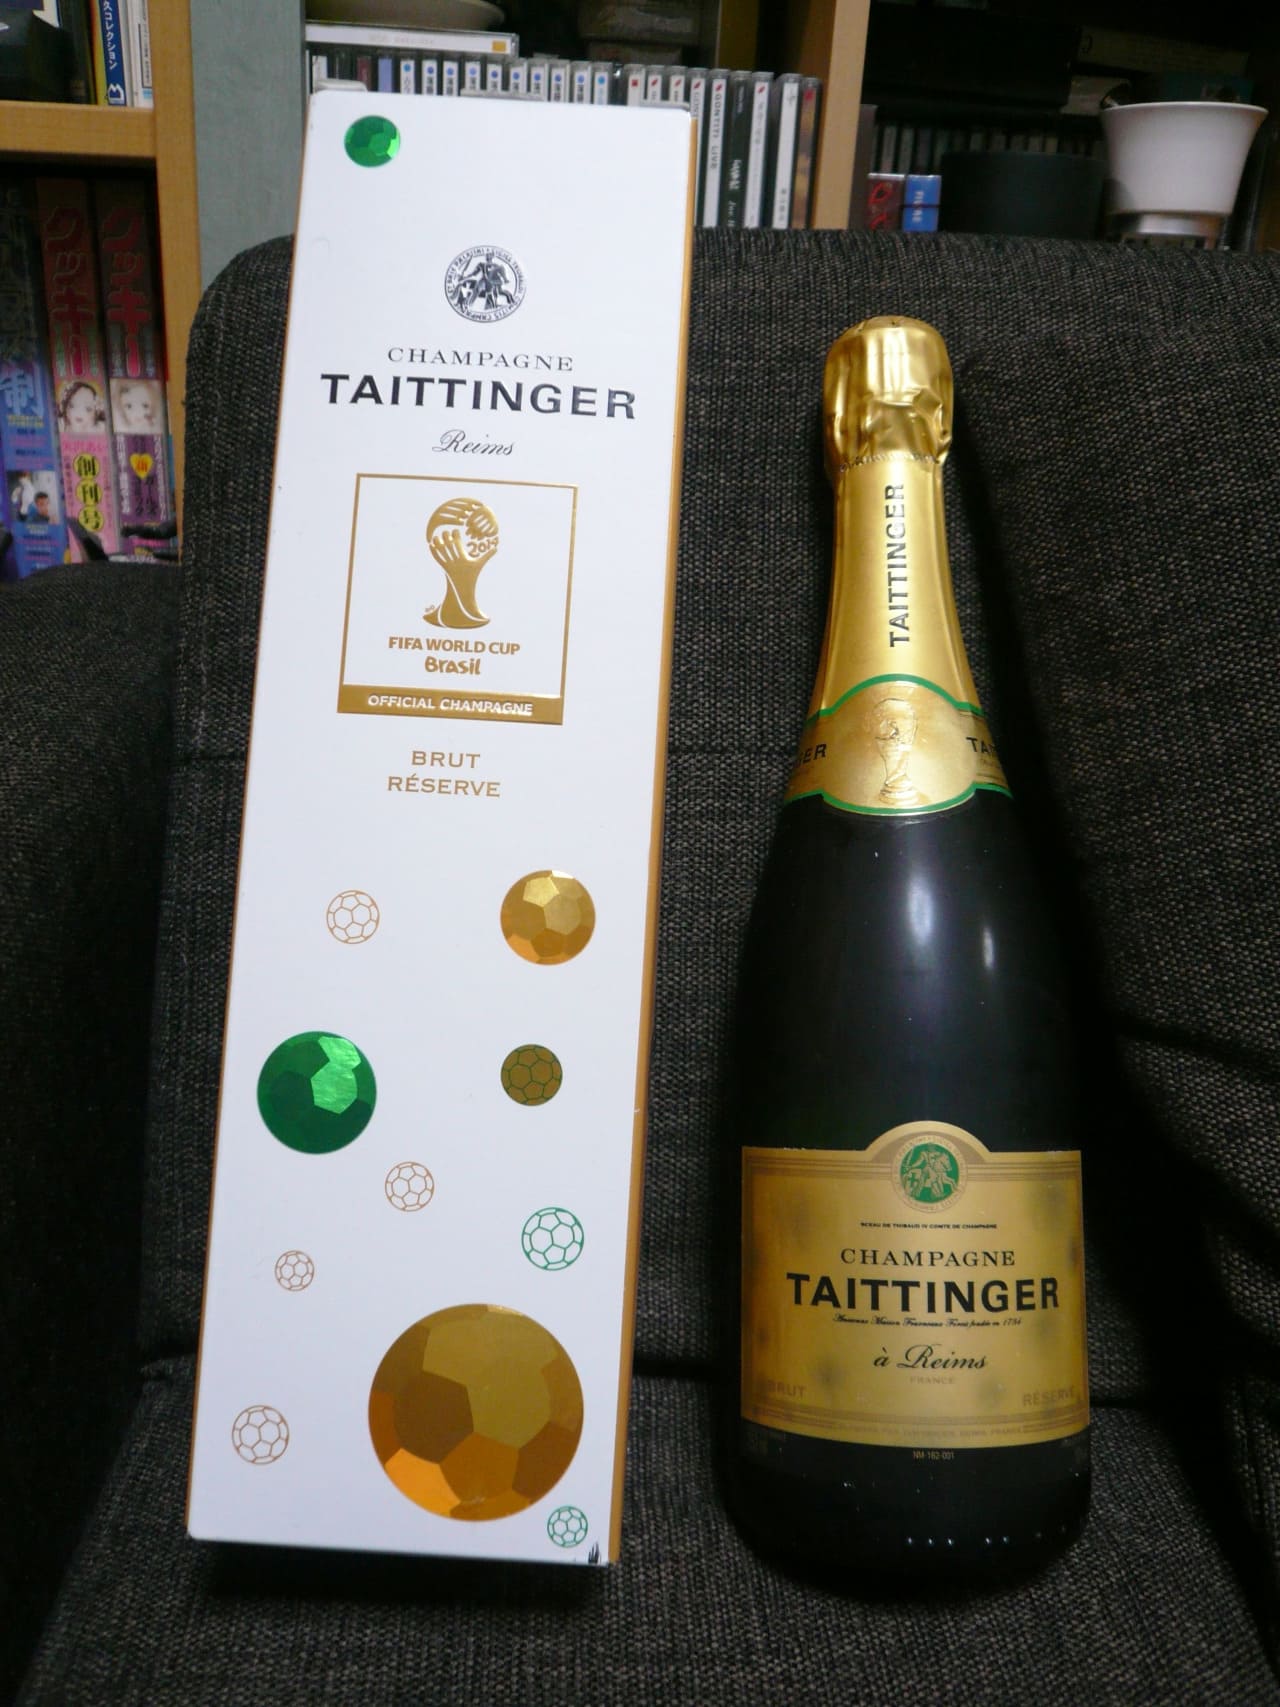 Taittinger Champagne Taittinger Brut Reserve Official Champagne of the 2014 FIFA World Cup